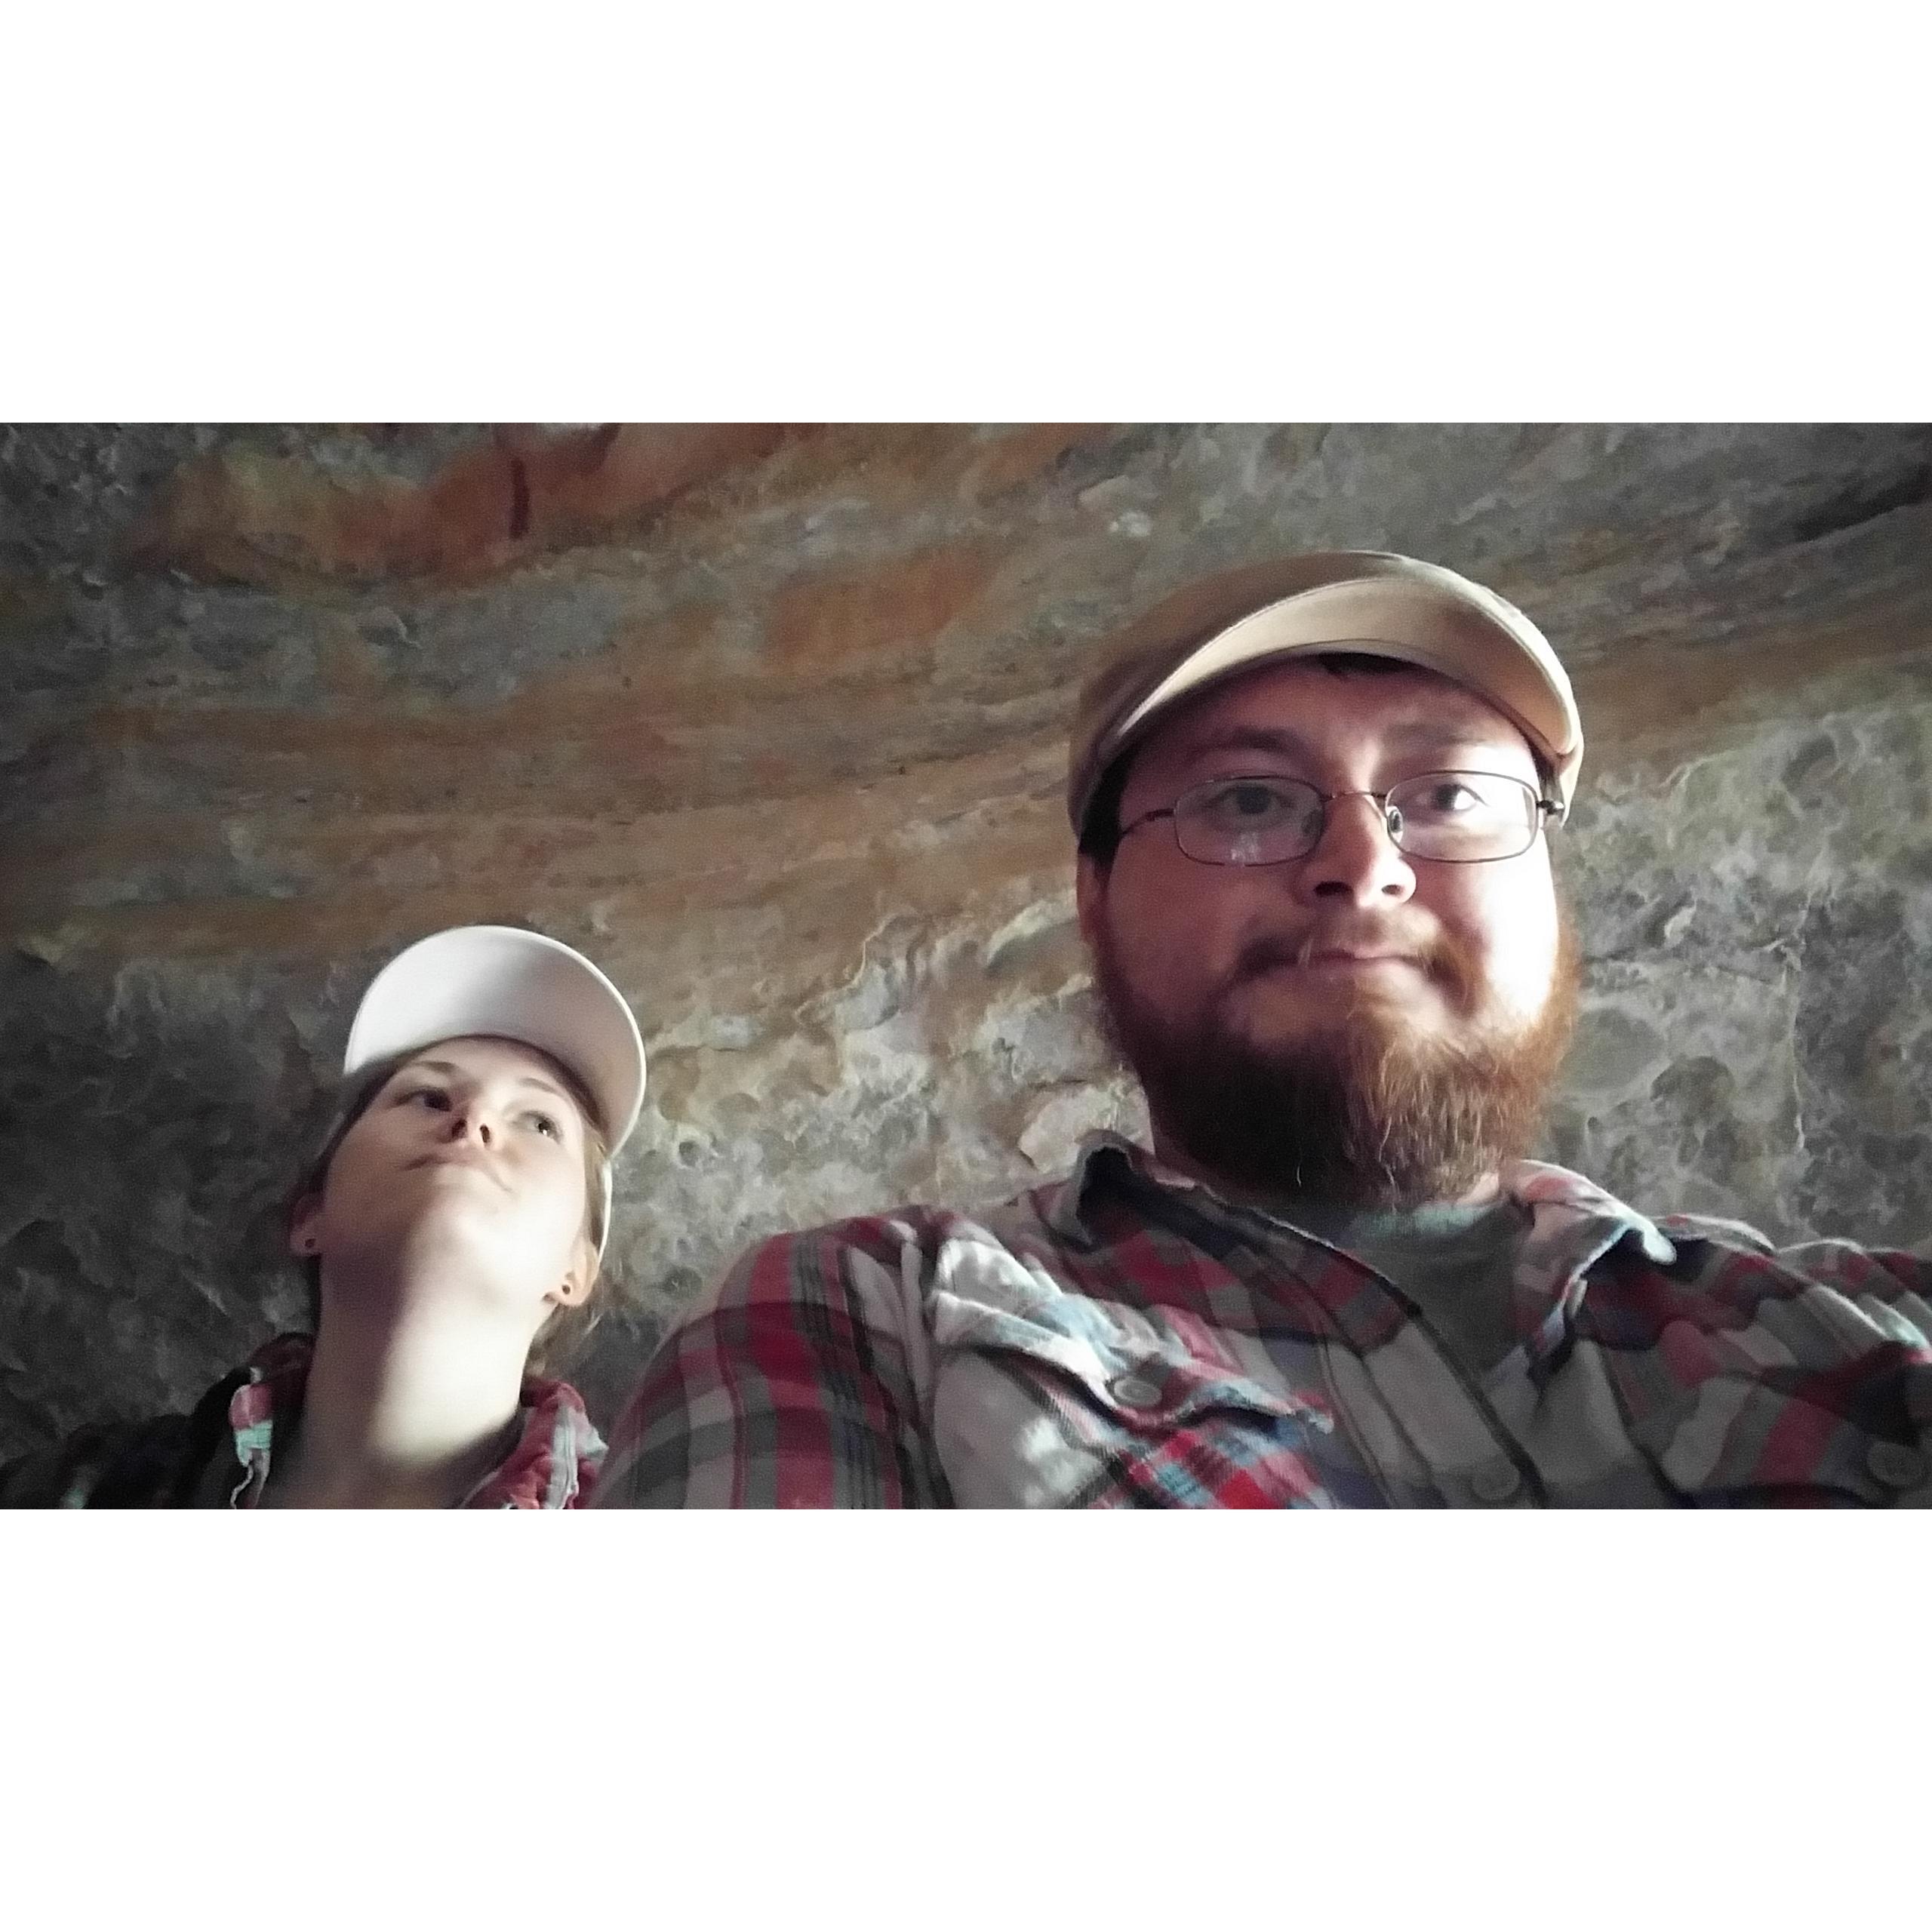 Hocking hills cave. If we were a band, this could be a neat photo.